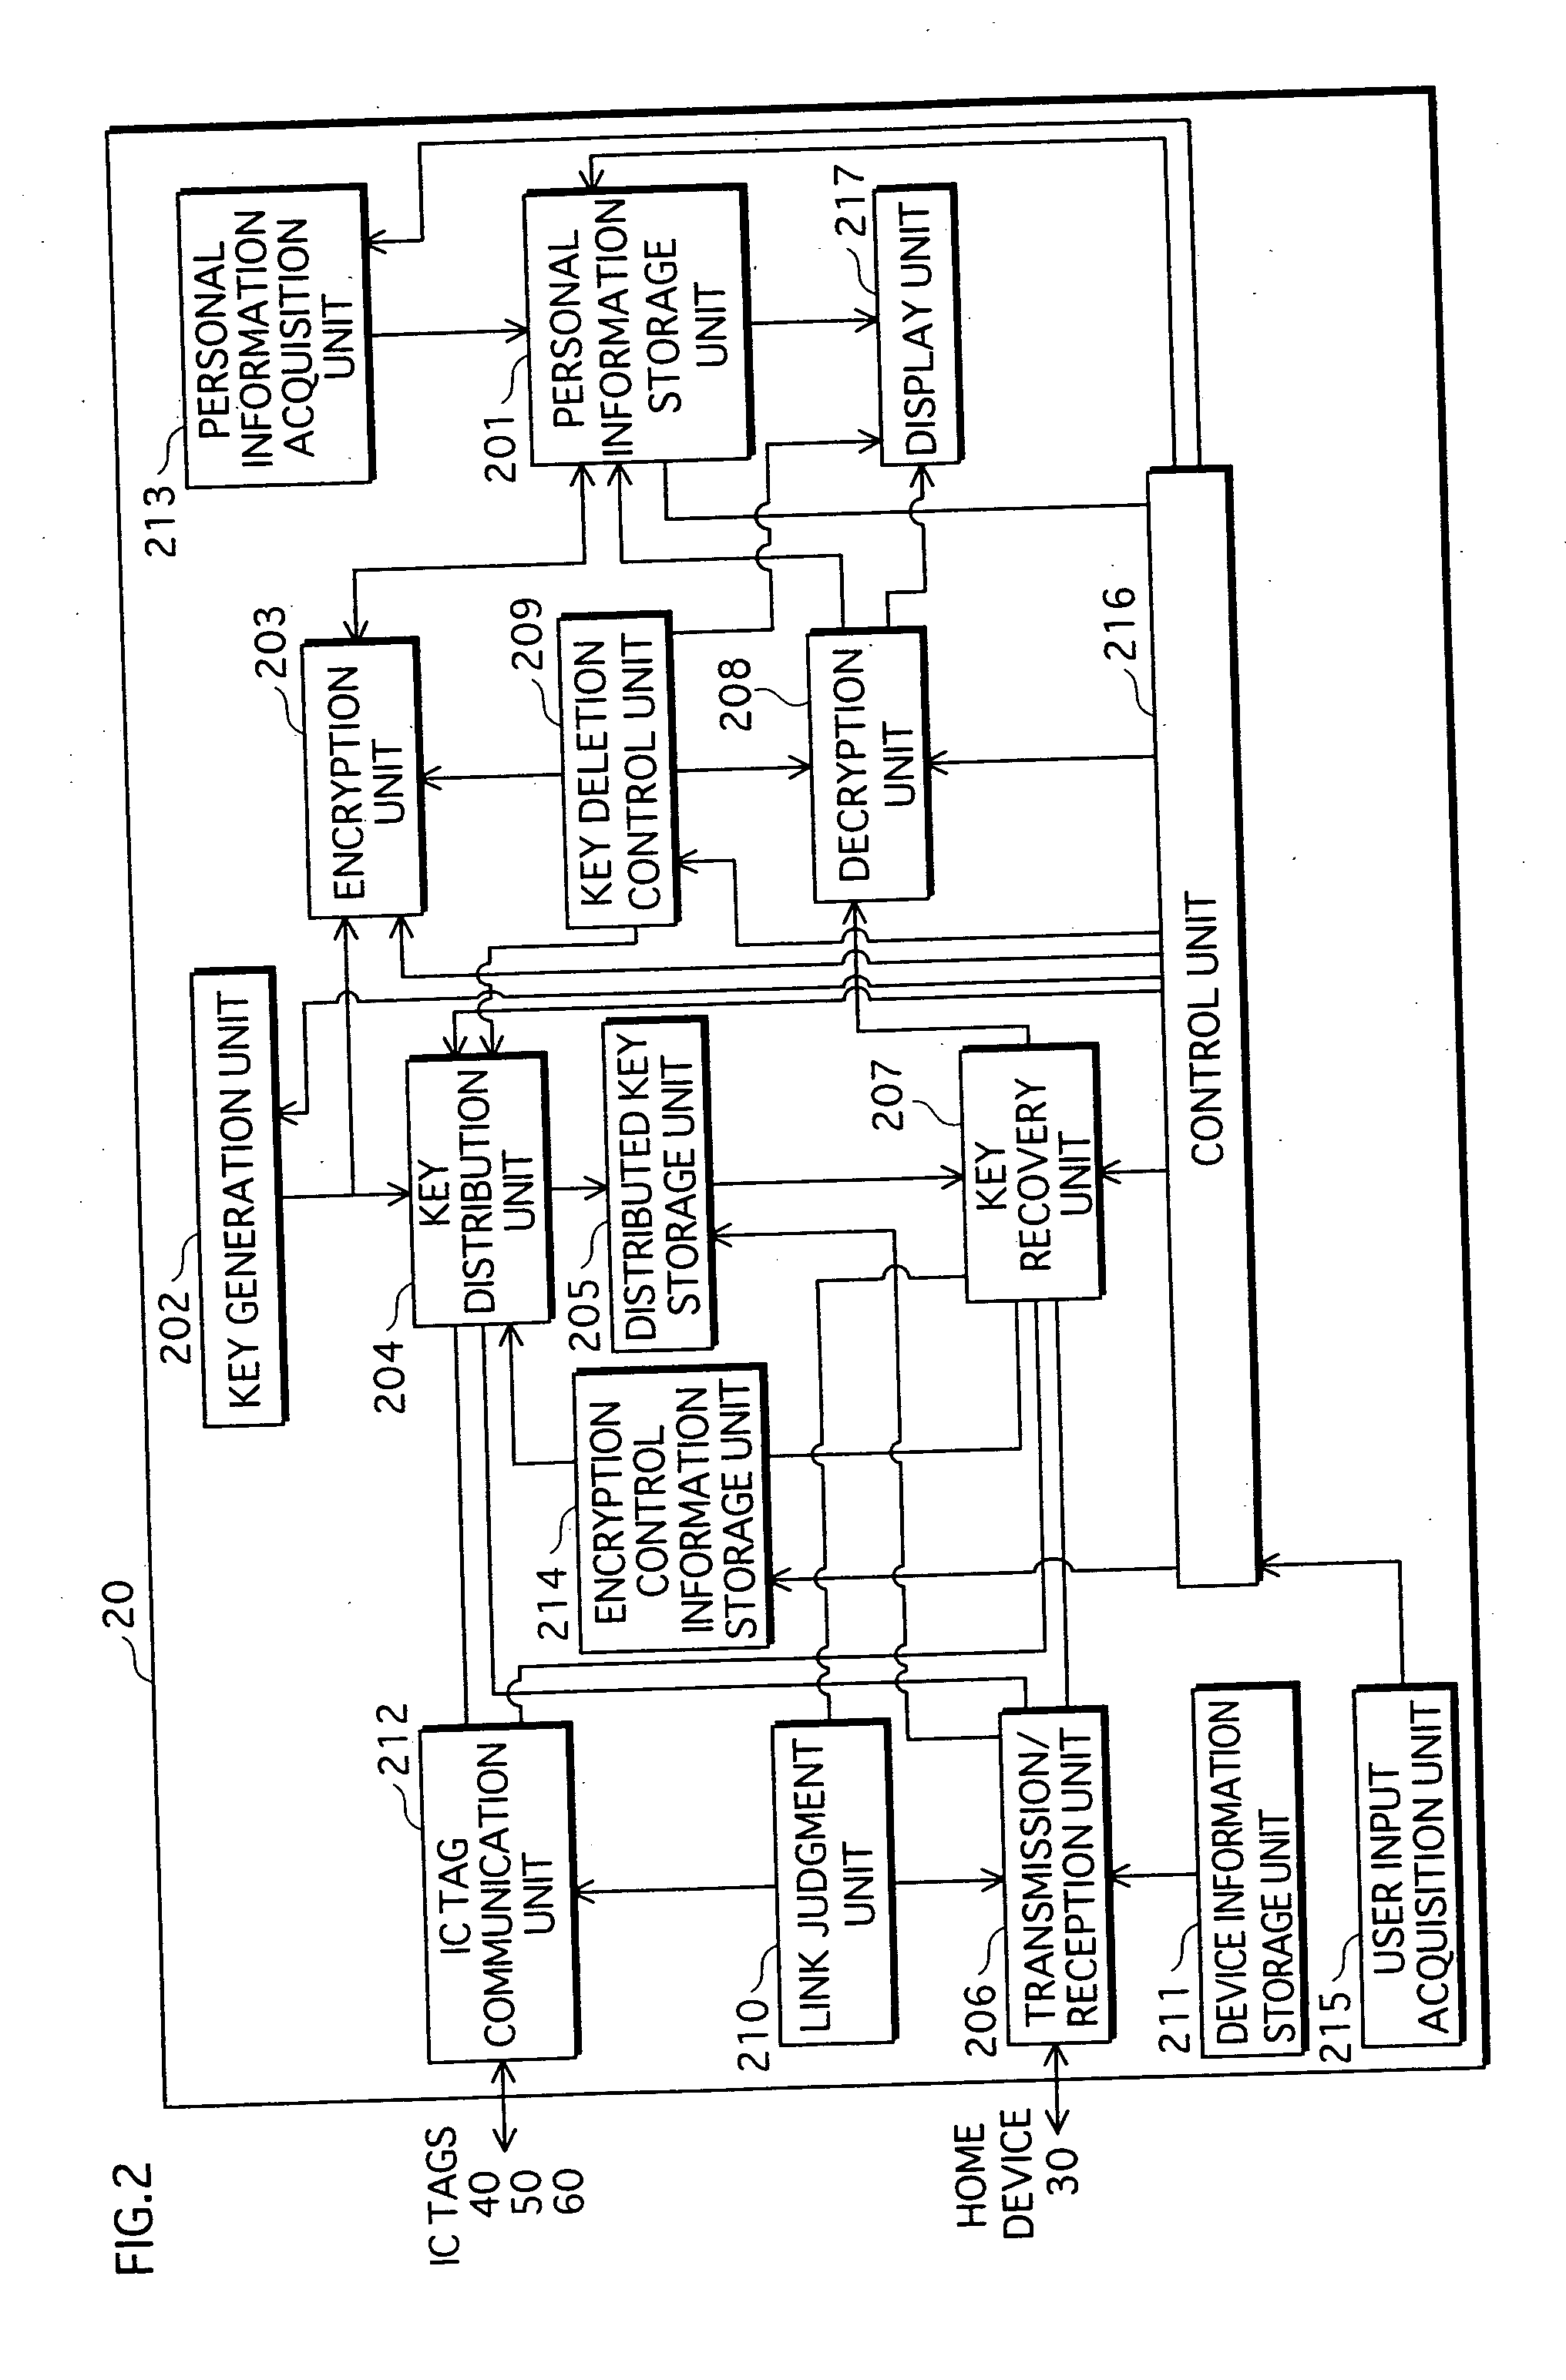 Personal Information Management Device, Distributed Key Storage Device, and Personal Information Management System